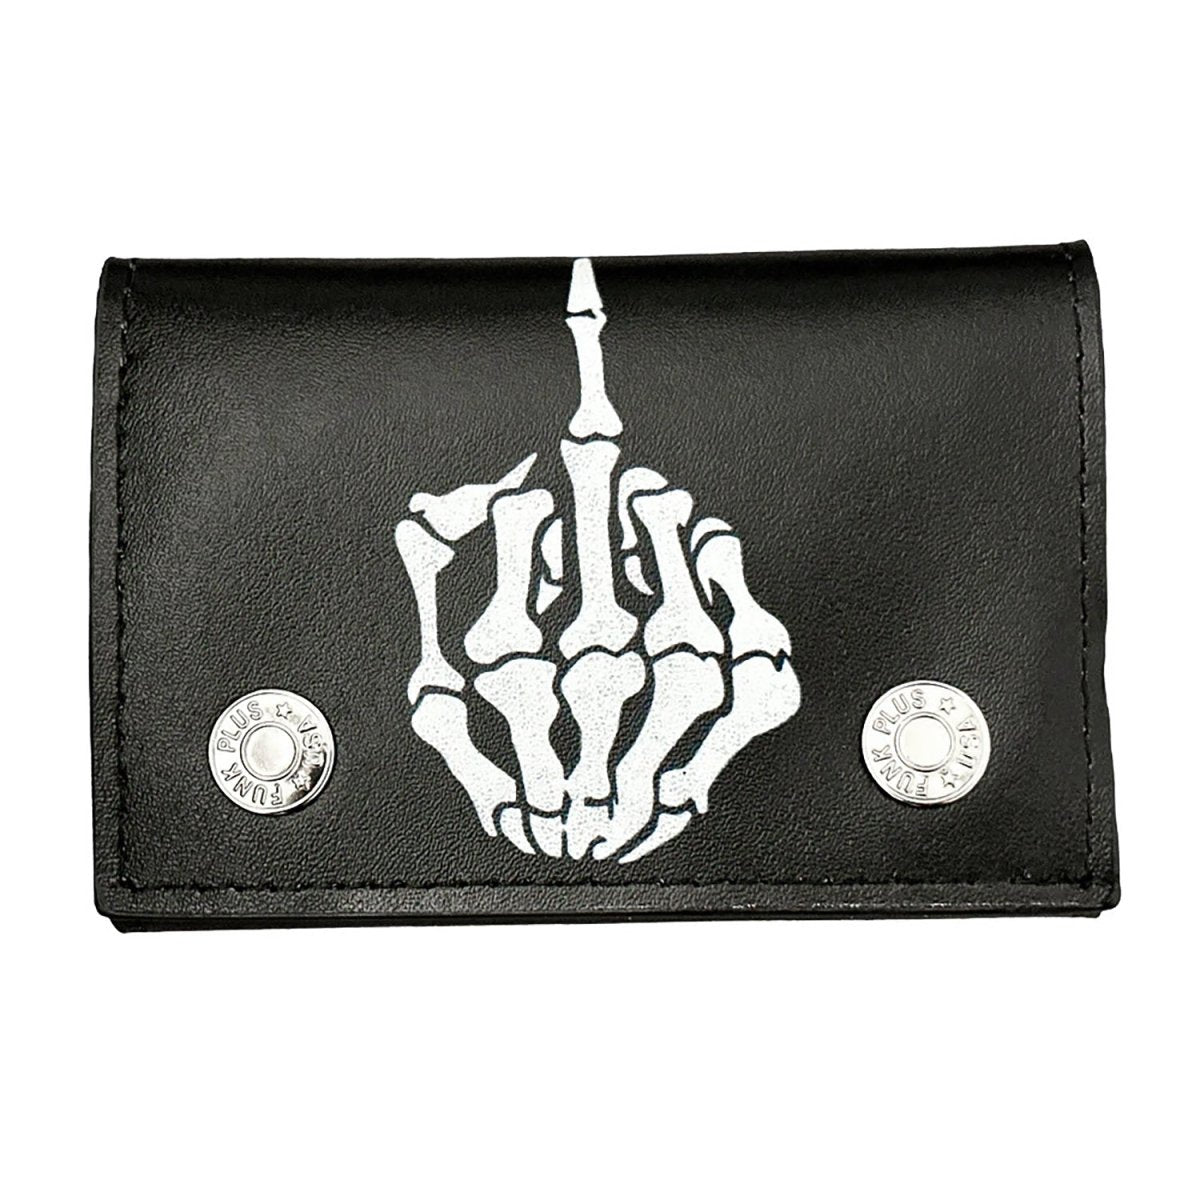 Too Fast | Funk Plus | F You Skeleton Hand Tri Fold Wallet